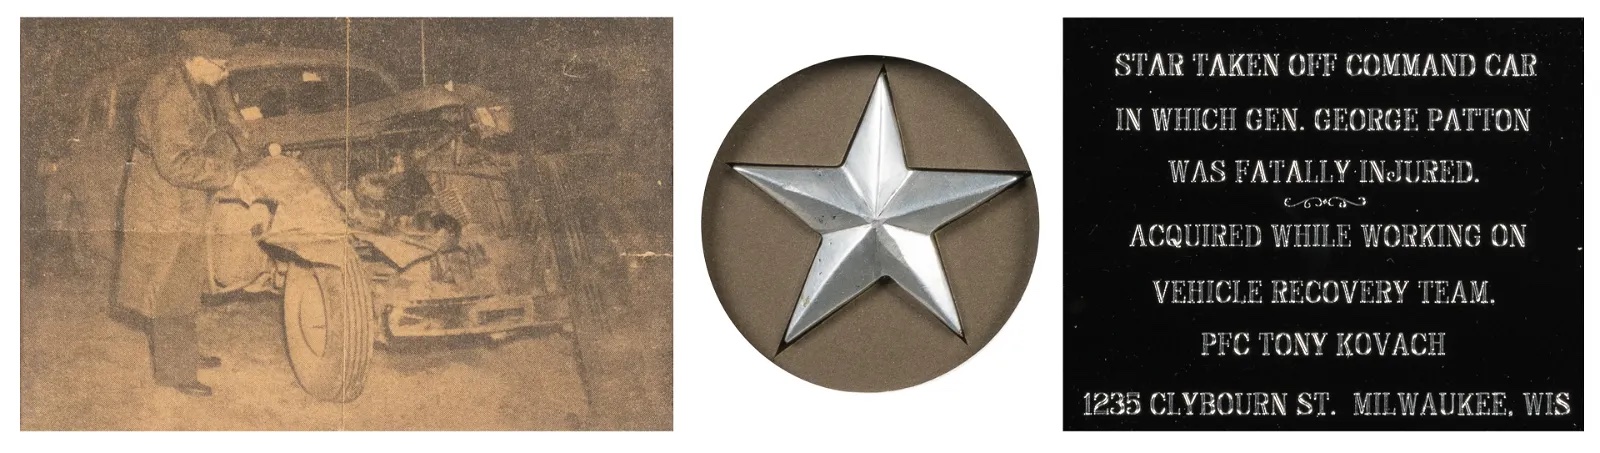 Metal star taken from General George Patton’s command car, in which he was fatally injured, estimated at $1,500-$3,000 at Potter & Potter.